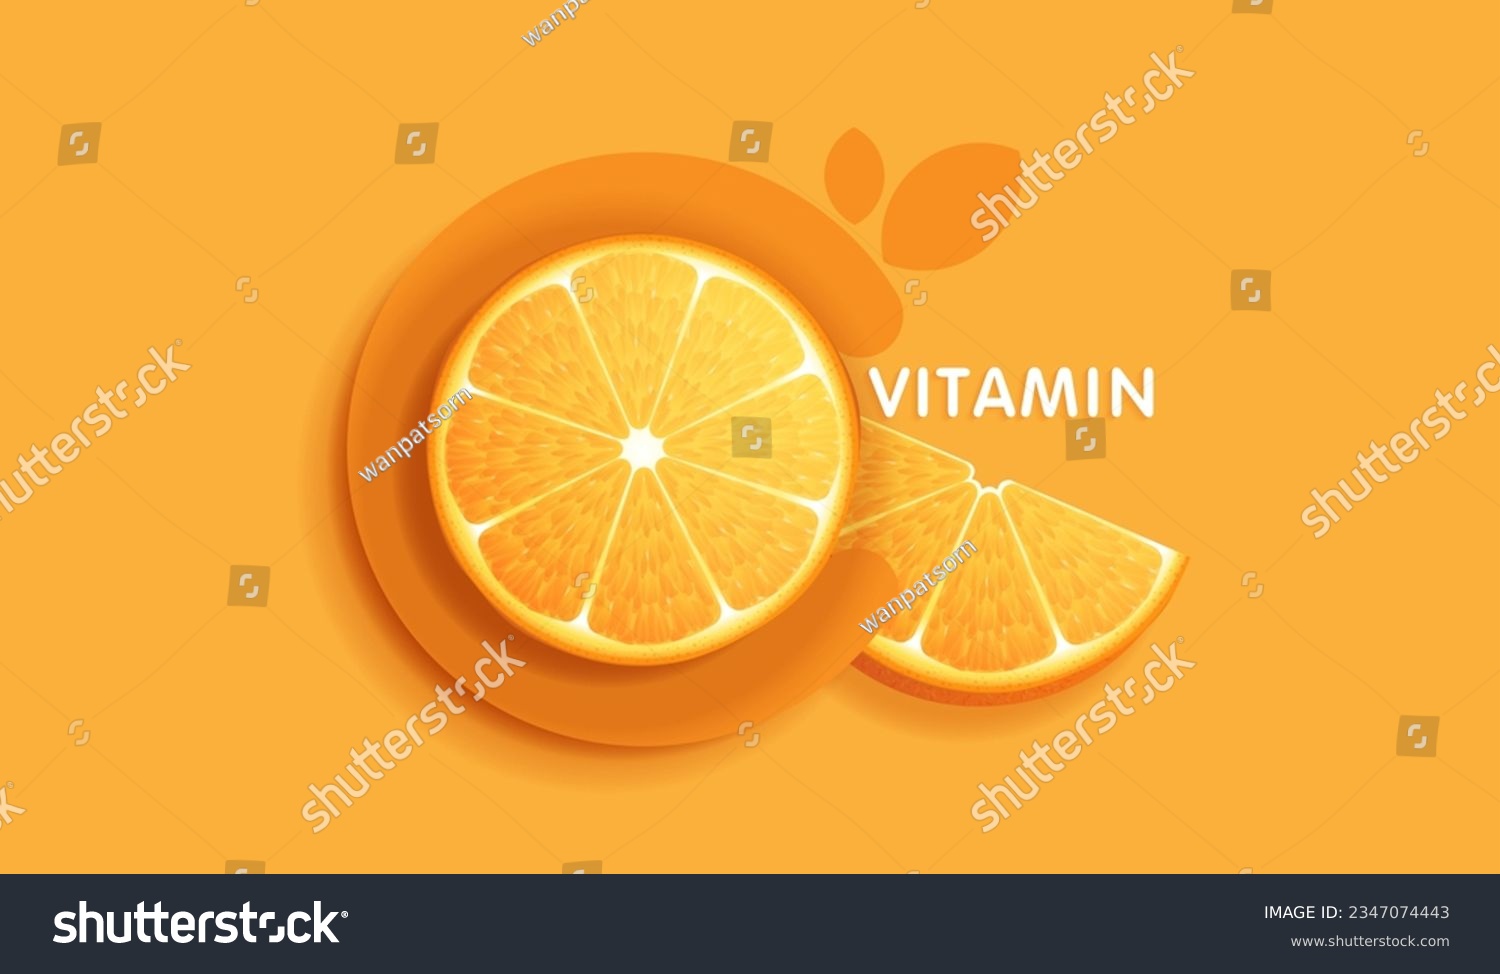 Orange fruits sliced top view on orange background. design for packaging presentation, advertising, cosmetic product display background. vitamin C nature. vector design. #2347074443